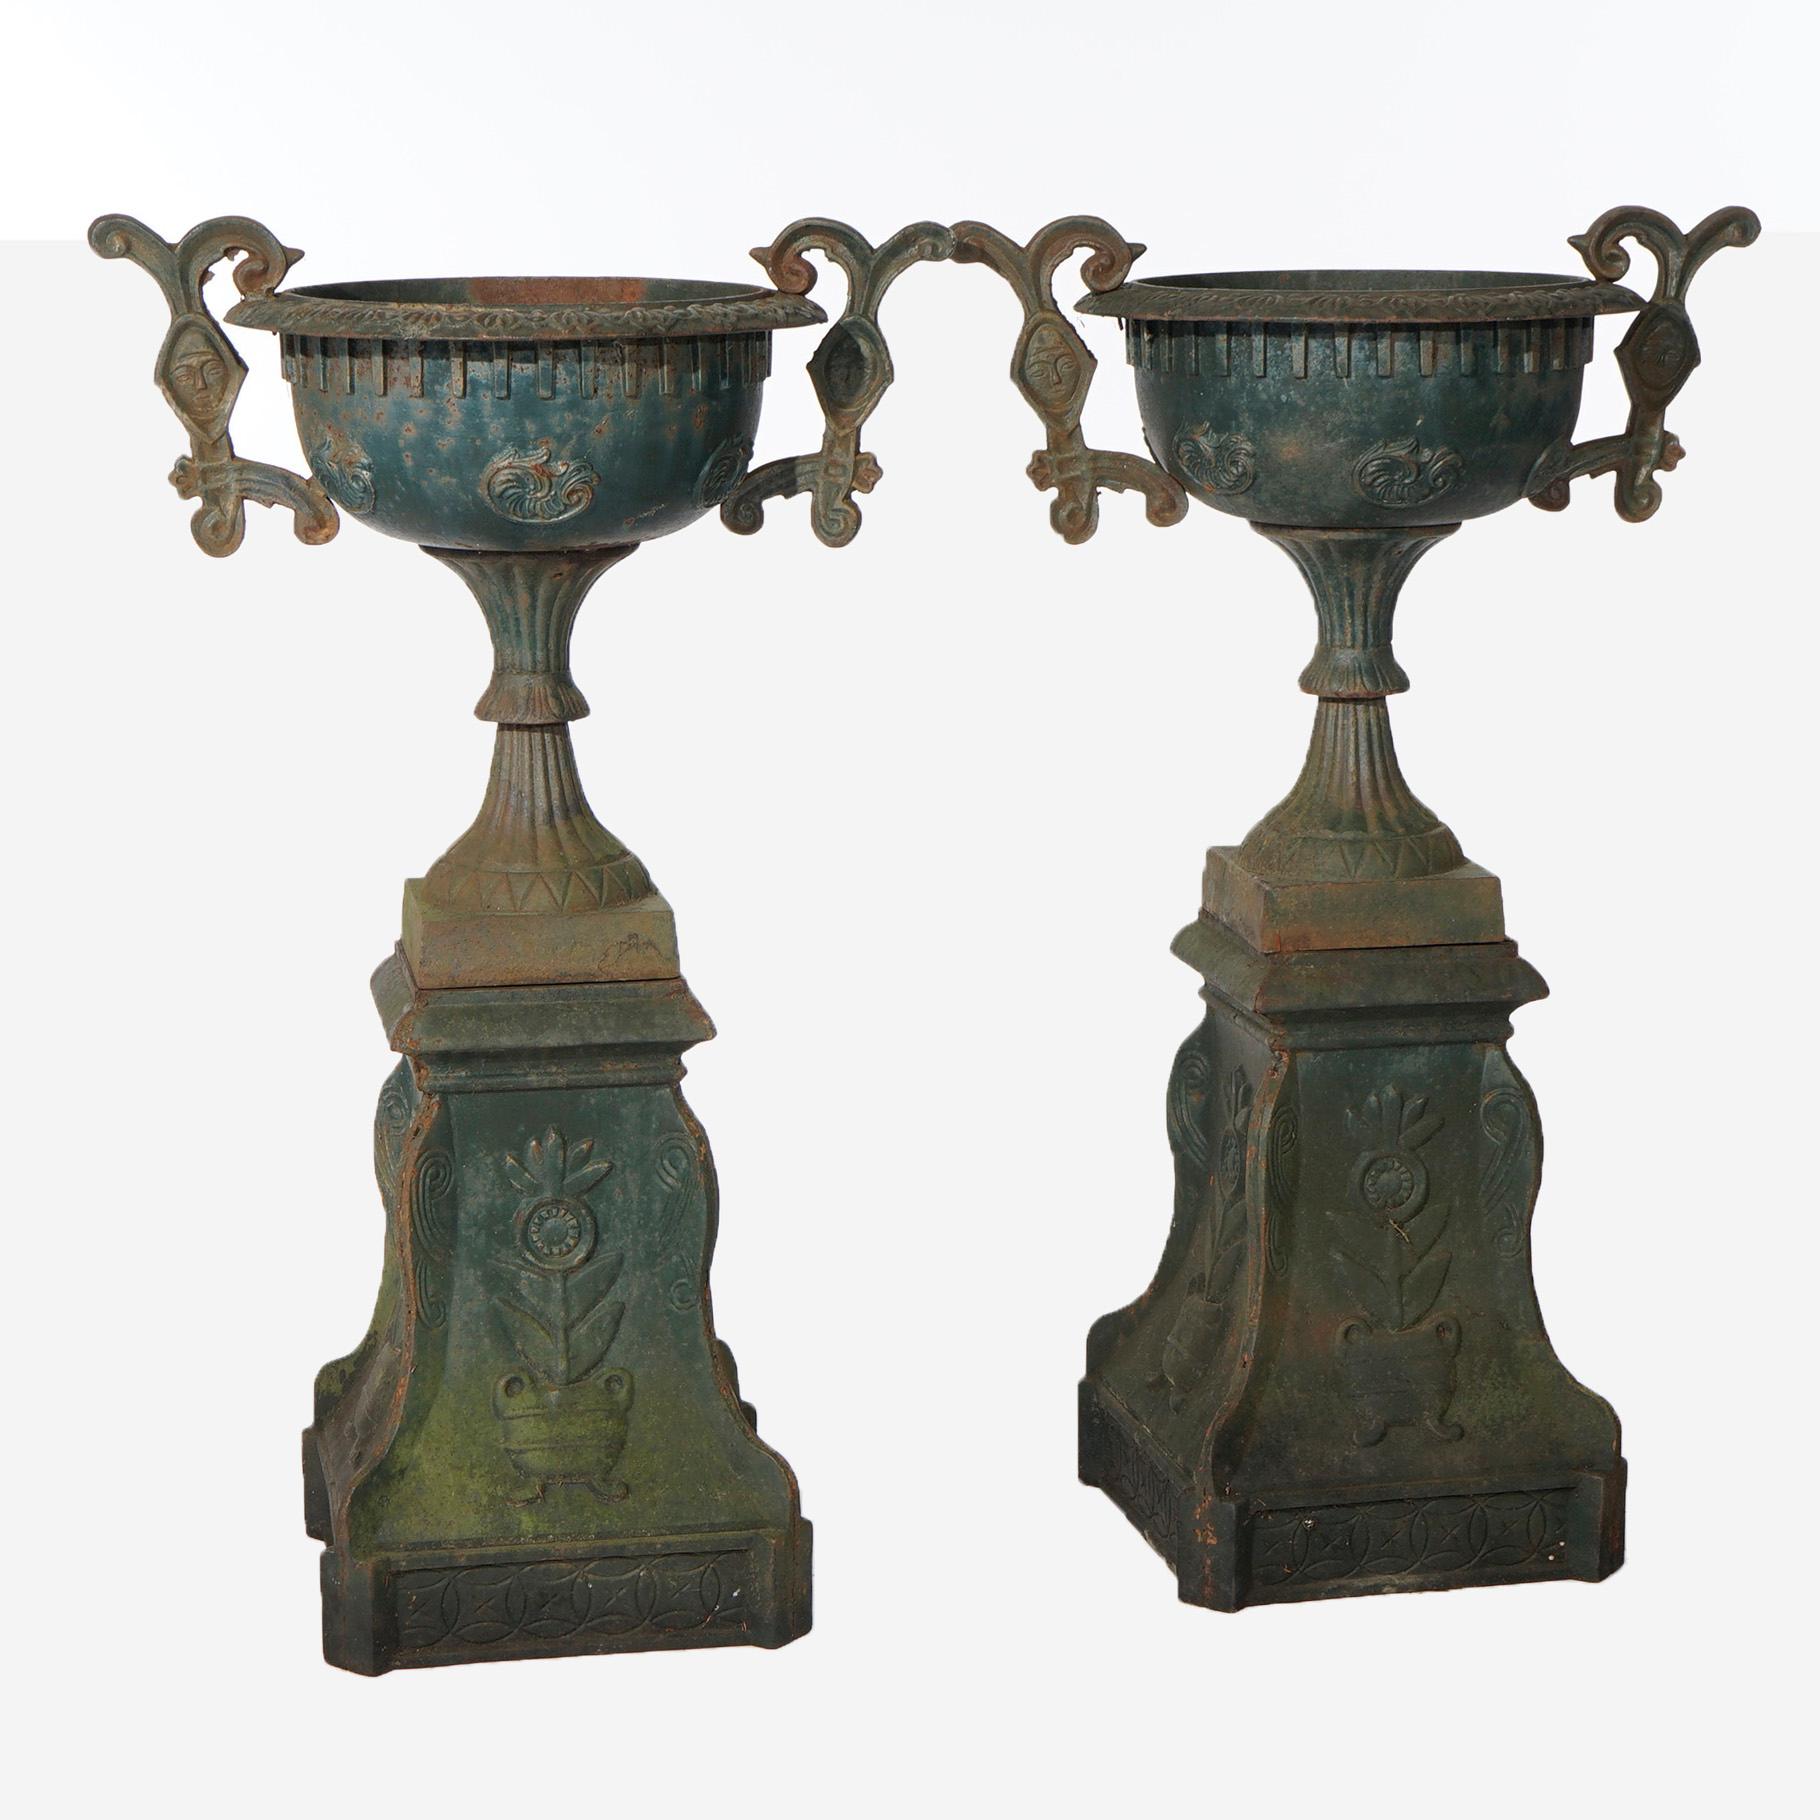 A pair of Grecian cast iron garden urns offer foliate embossed bowls with flanking scroll form handles having central mask, raised on floral embossed plinths, 20th century

Measures- 41.5''H x 24.75''W x 24.5''D

*Ask about DISCOUNTED DELIVERY rates